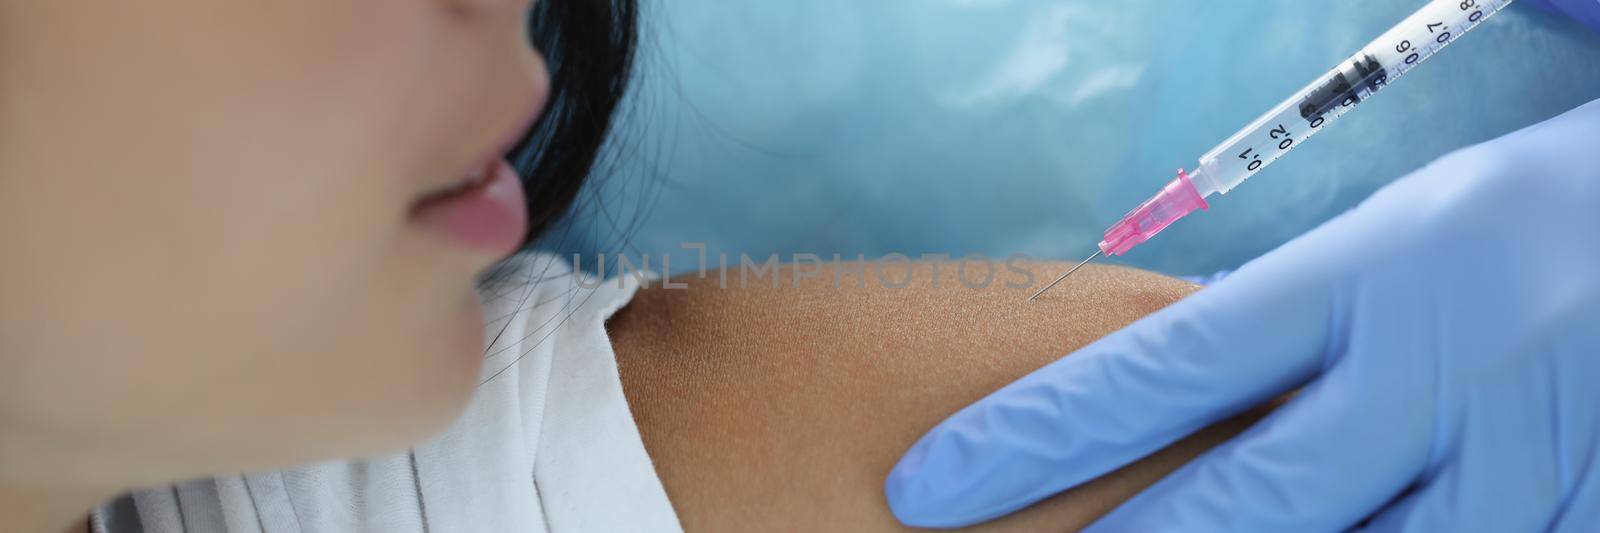 Close-up of doctor hand holding syringe making covid vaccination injection dose in shoulder of female patient, vaccination injection on arm. Coronavirus immunization, medicine, healthcare concept